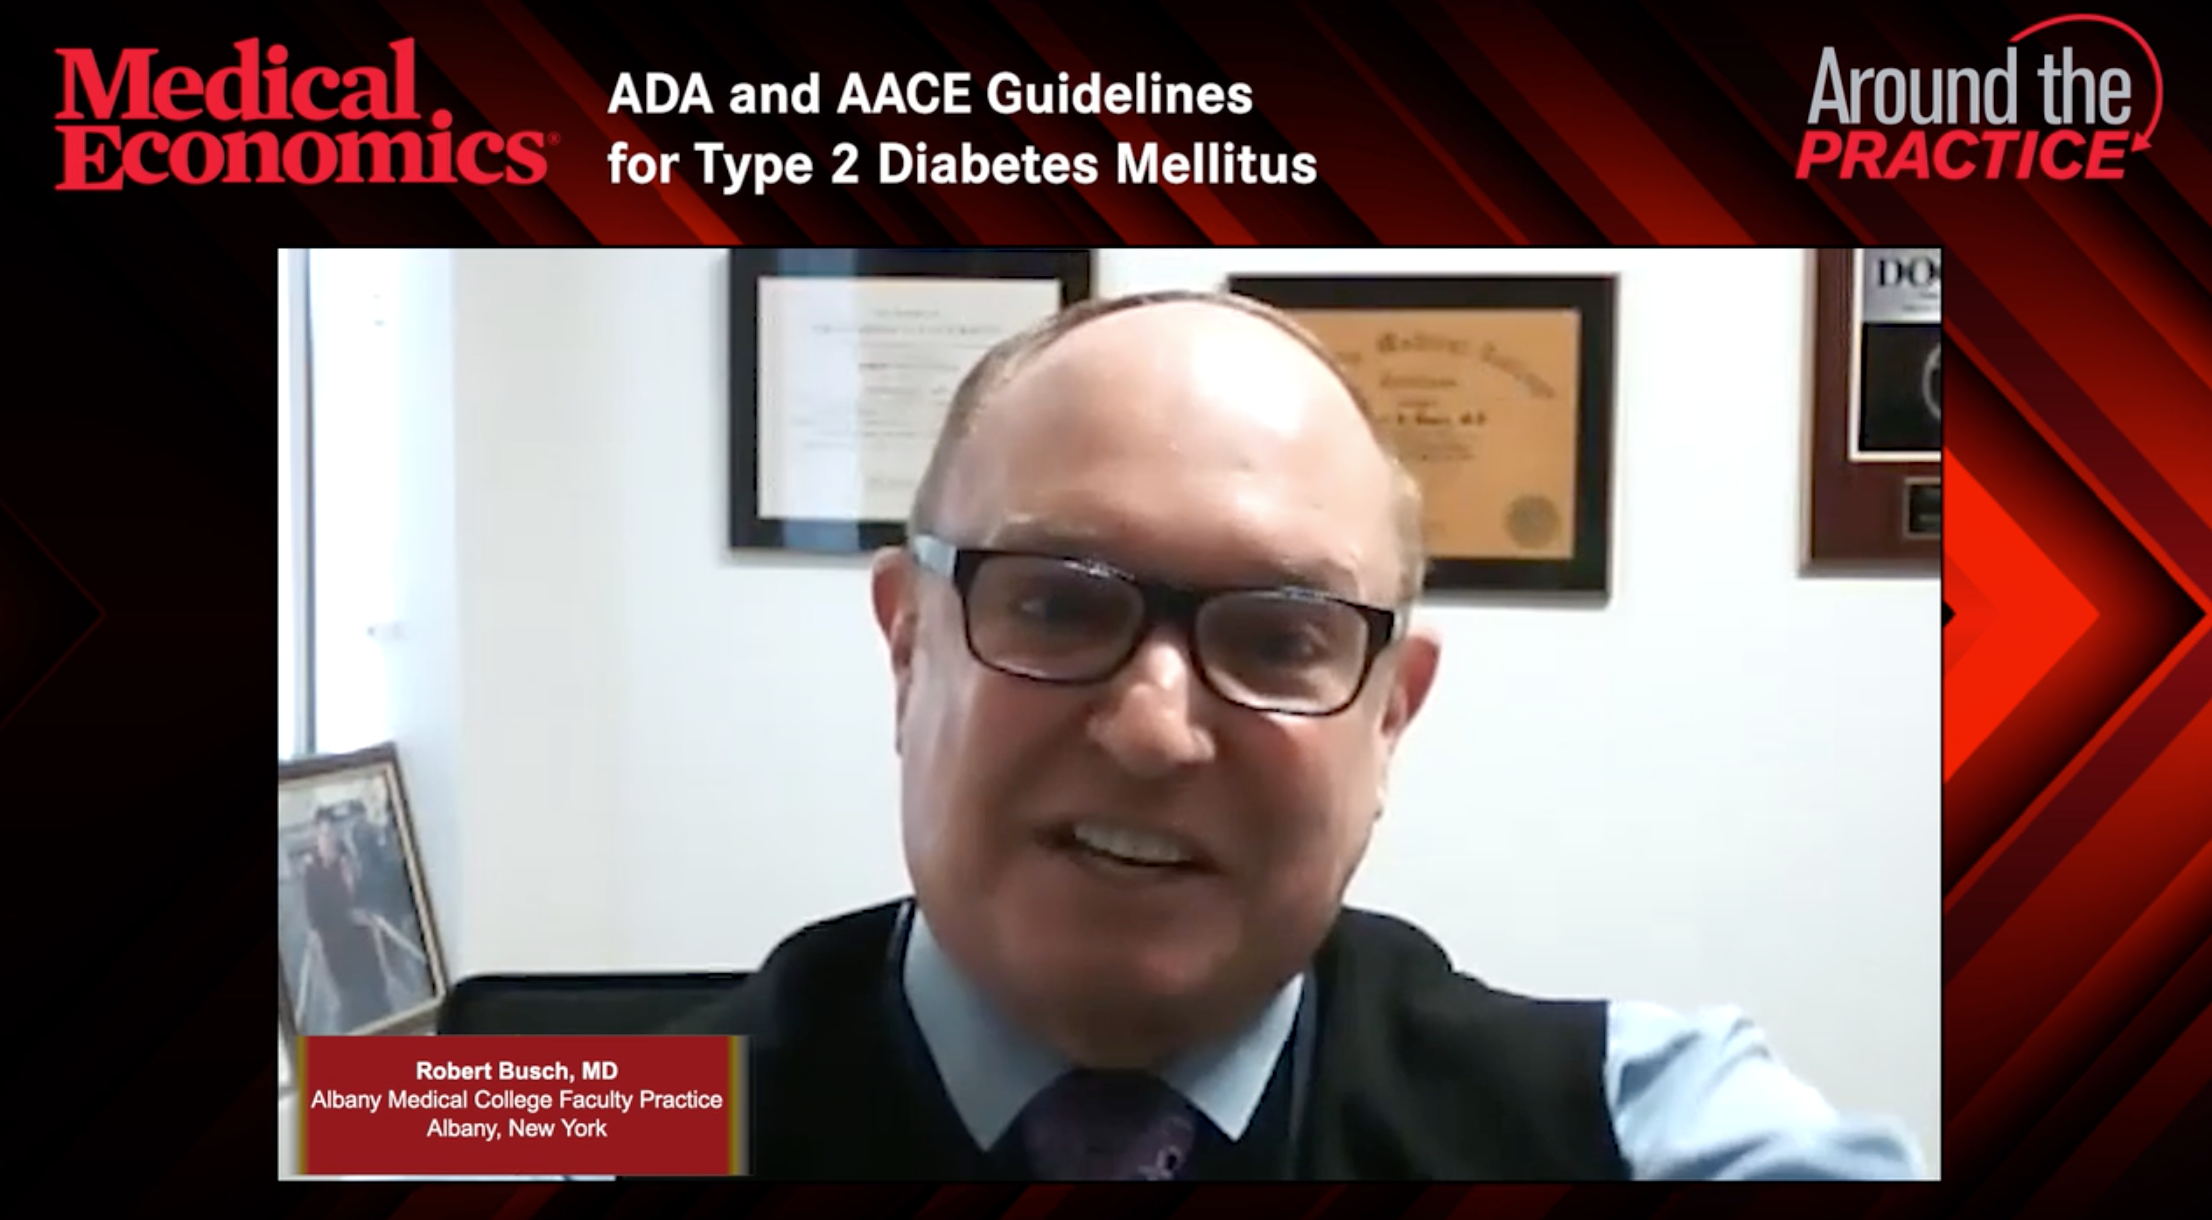 ADA and AACE Guidelines for Type 2 Diabetes Mellitus